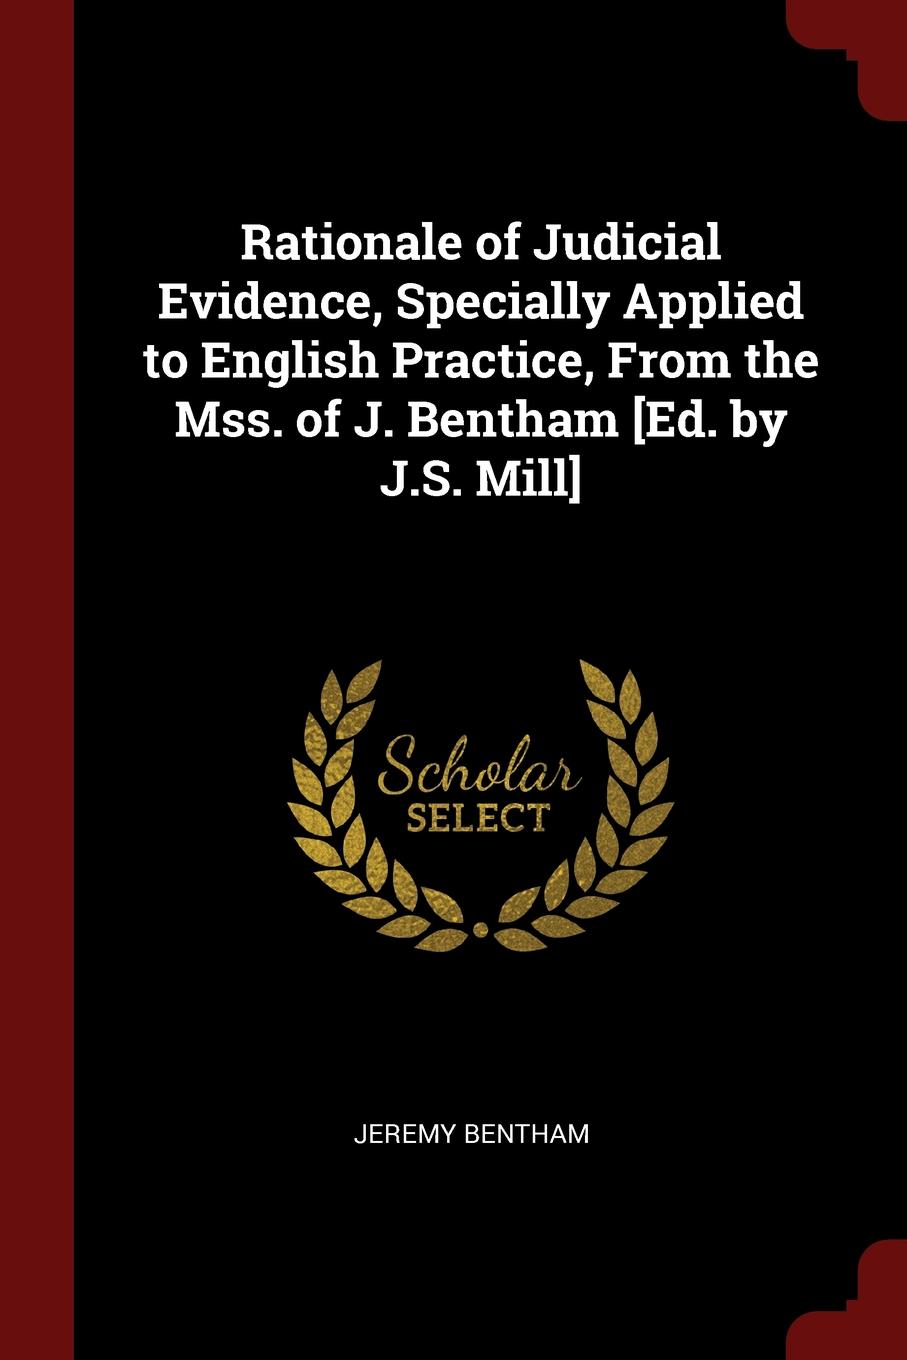 Rationale of Judicial Evidence, Specially Applied to English Practice, From the Mss. of J. Bentham .Ed. by J.S. Mill.